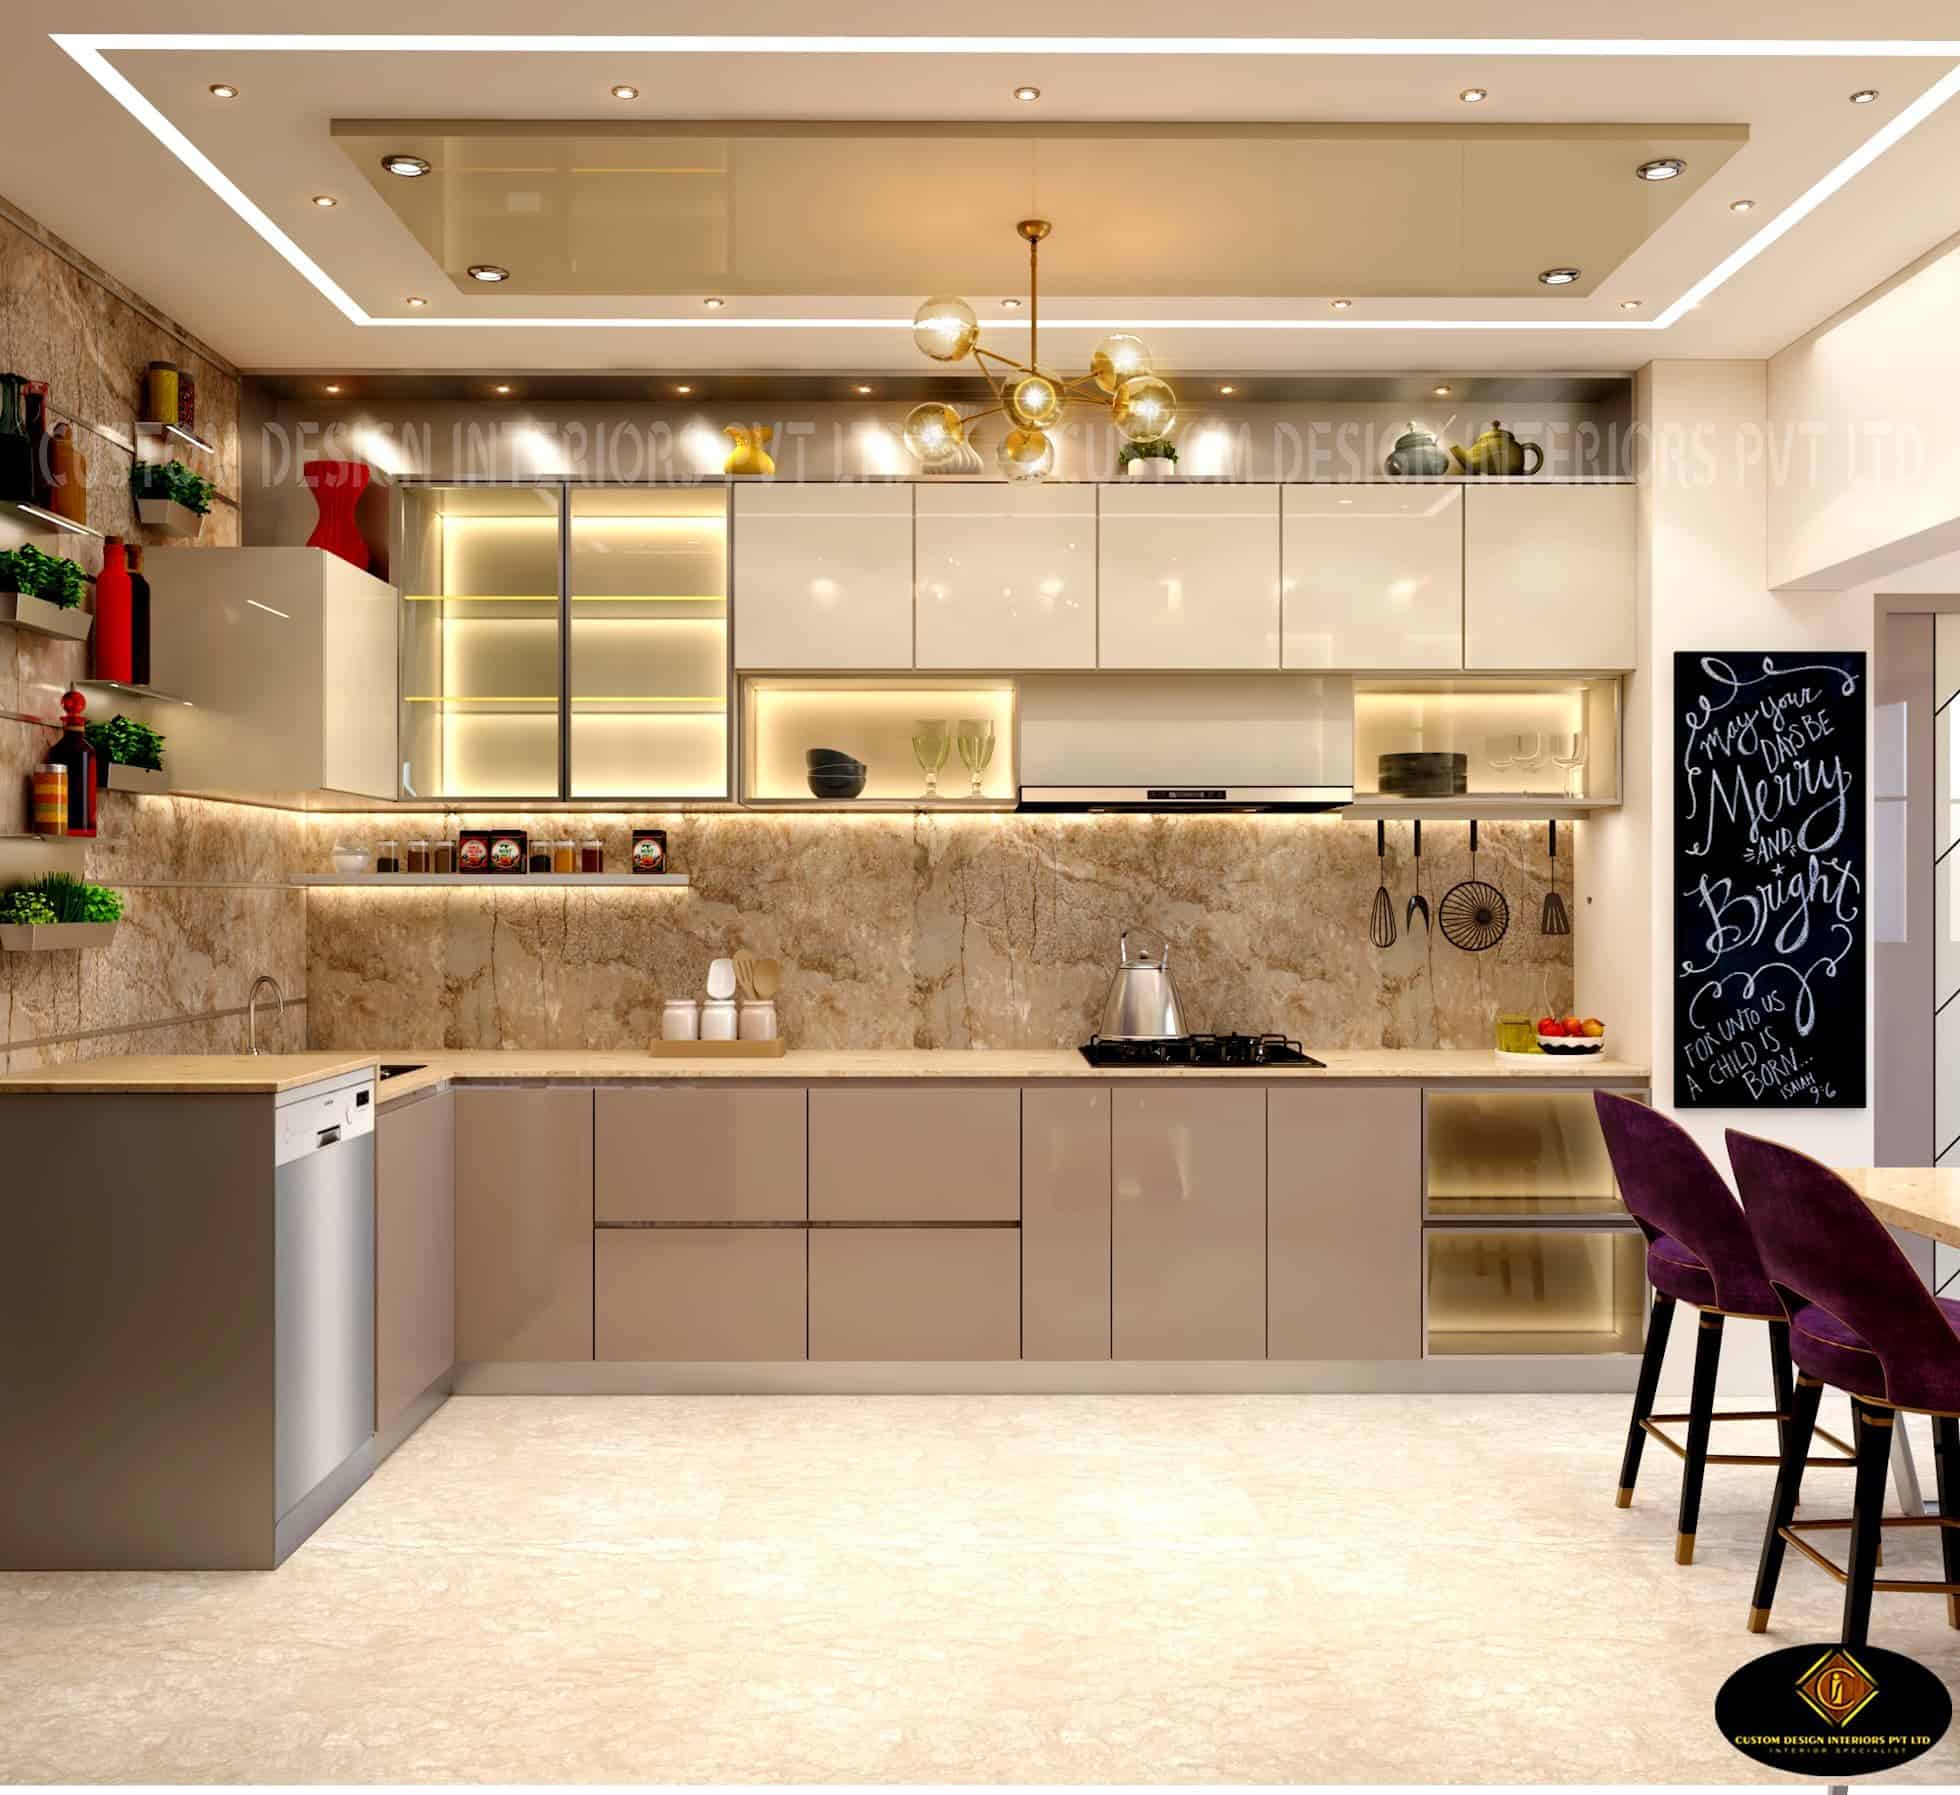 What Are the Latest Trends in Modern Kitchen Design